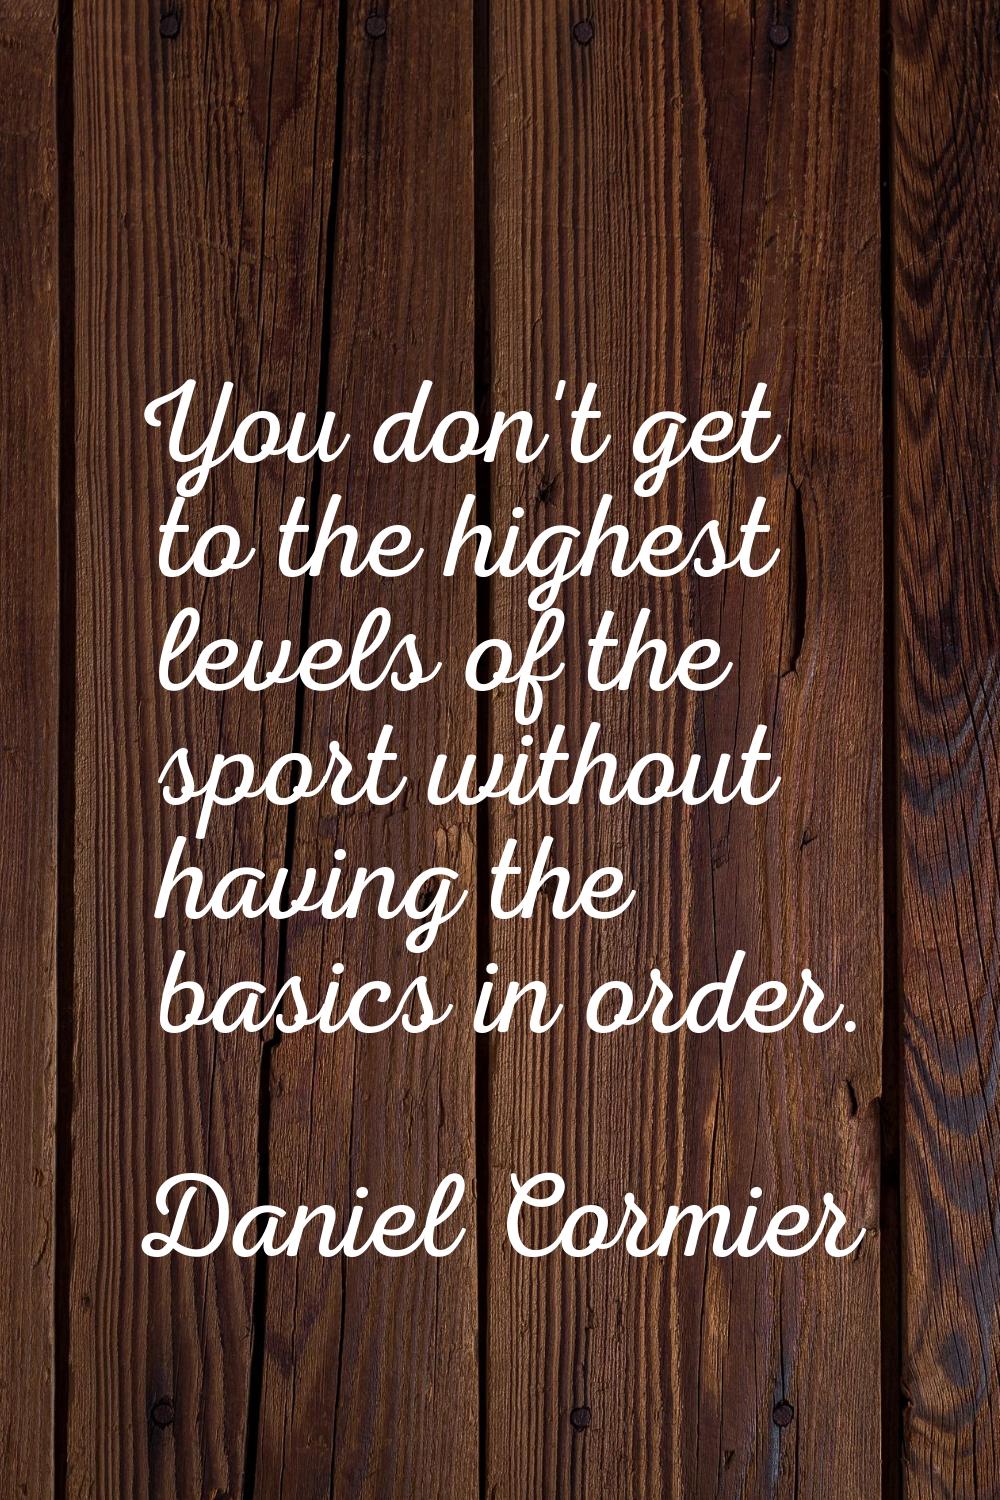 You don't get to the highest levels of the sport without having the basics in order.